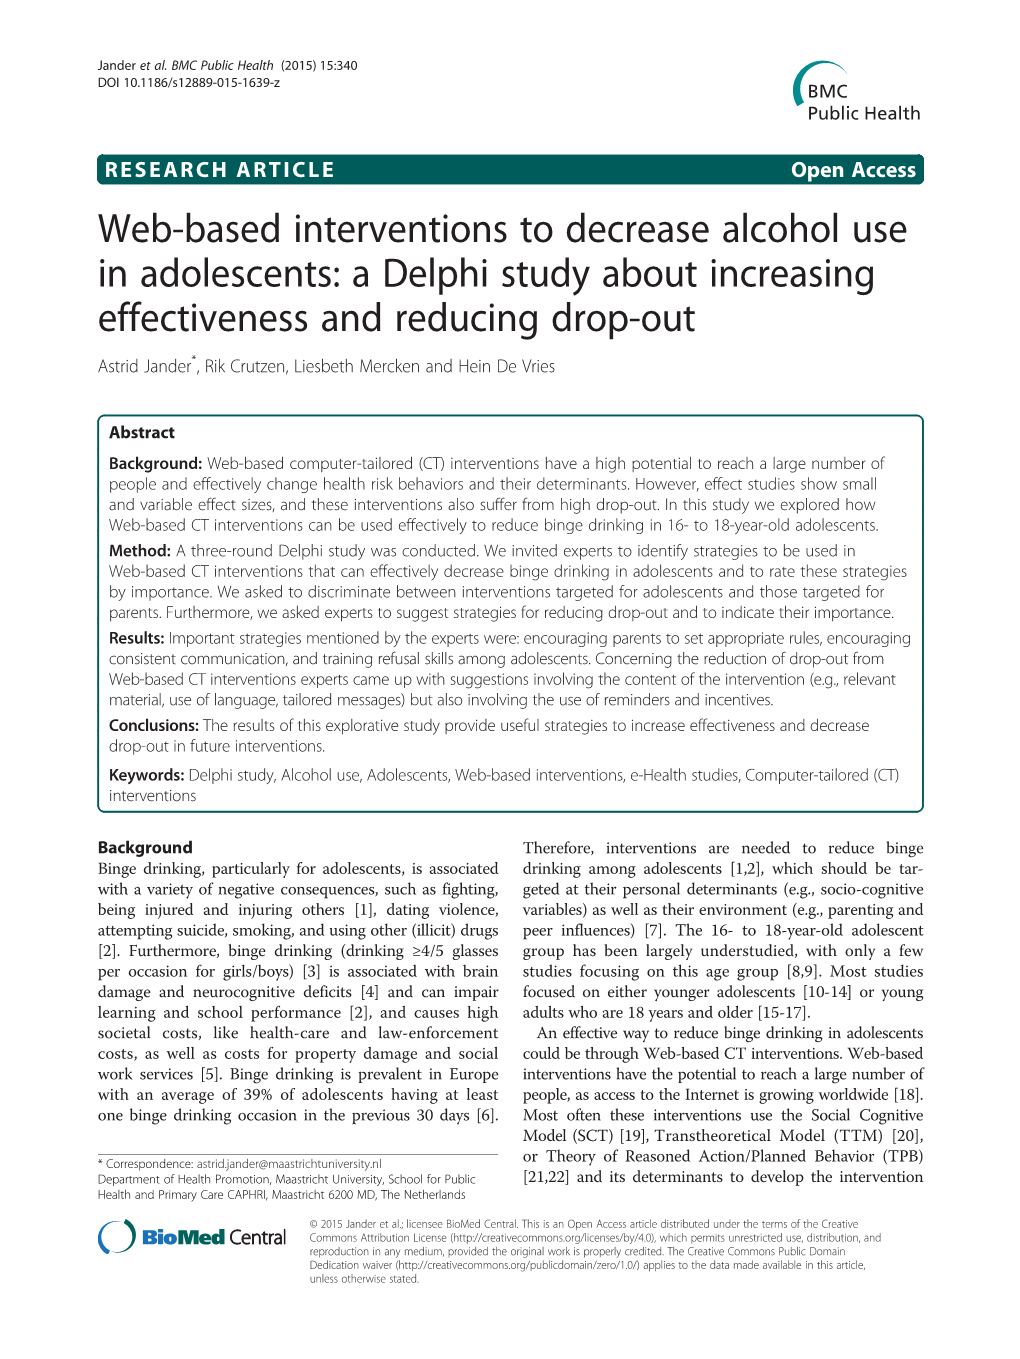 Web-Based Interventions to Decrease Alcohol Use in Adolescents